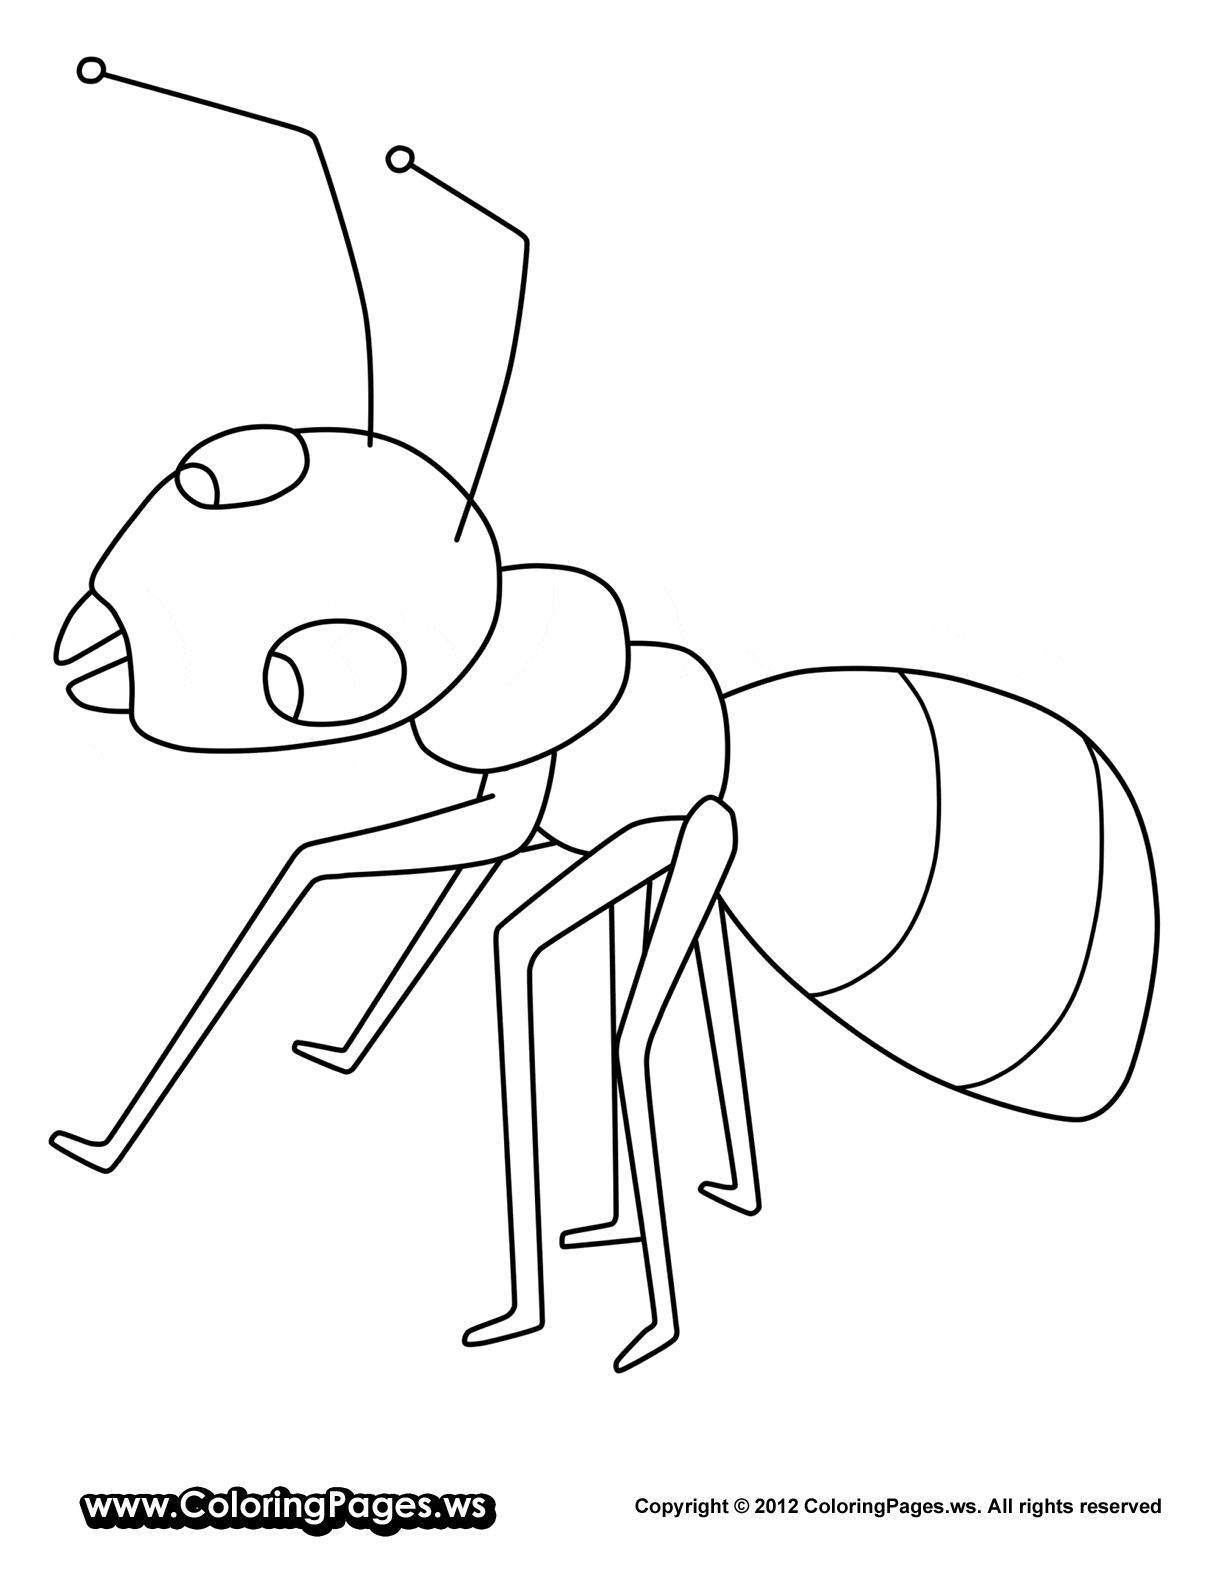 Animal Coloring Pages   Coloring Cool